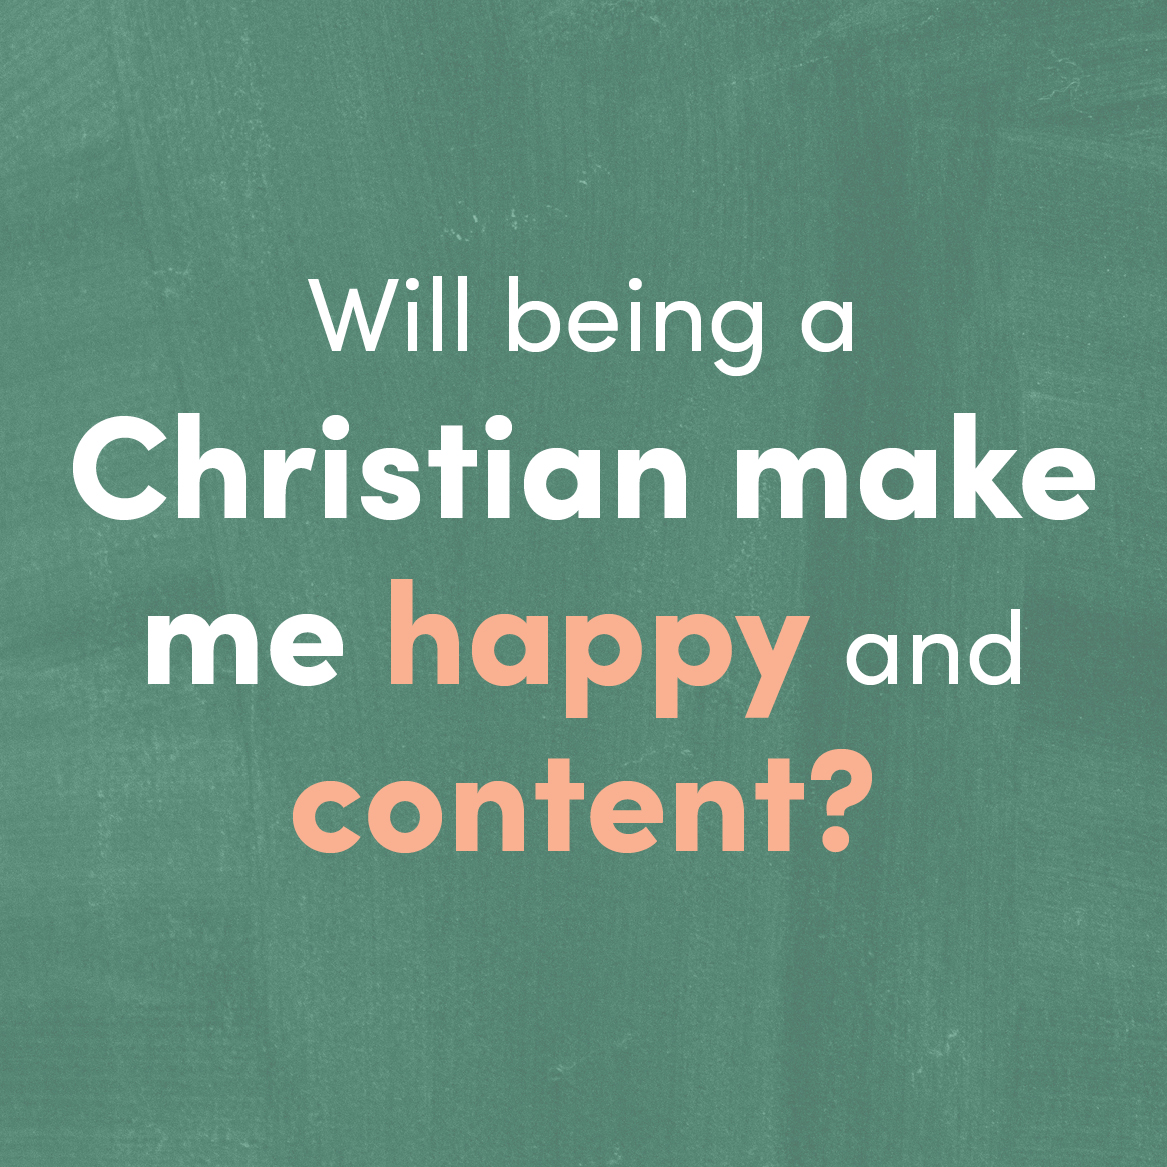 Will being a Christian make me happy and content?